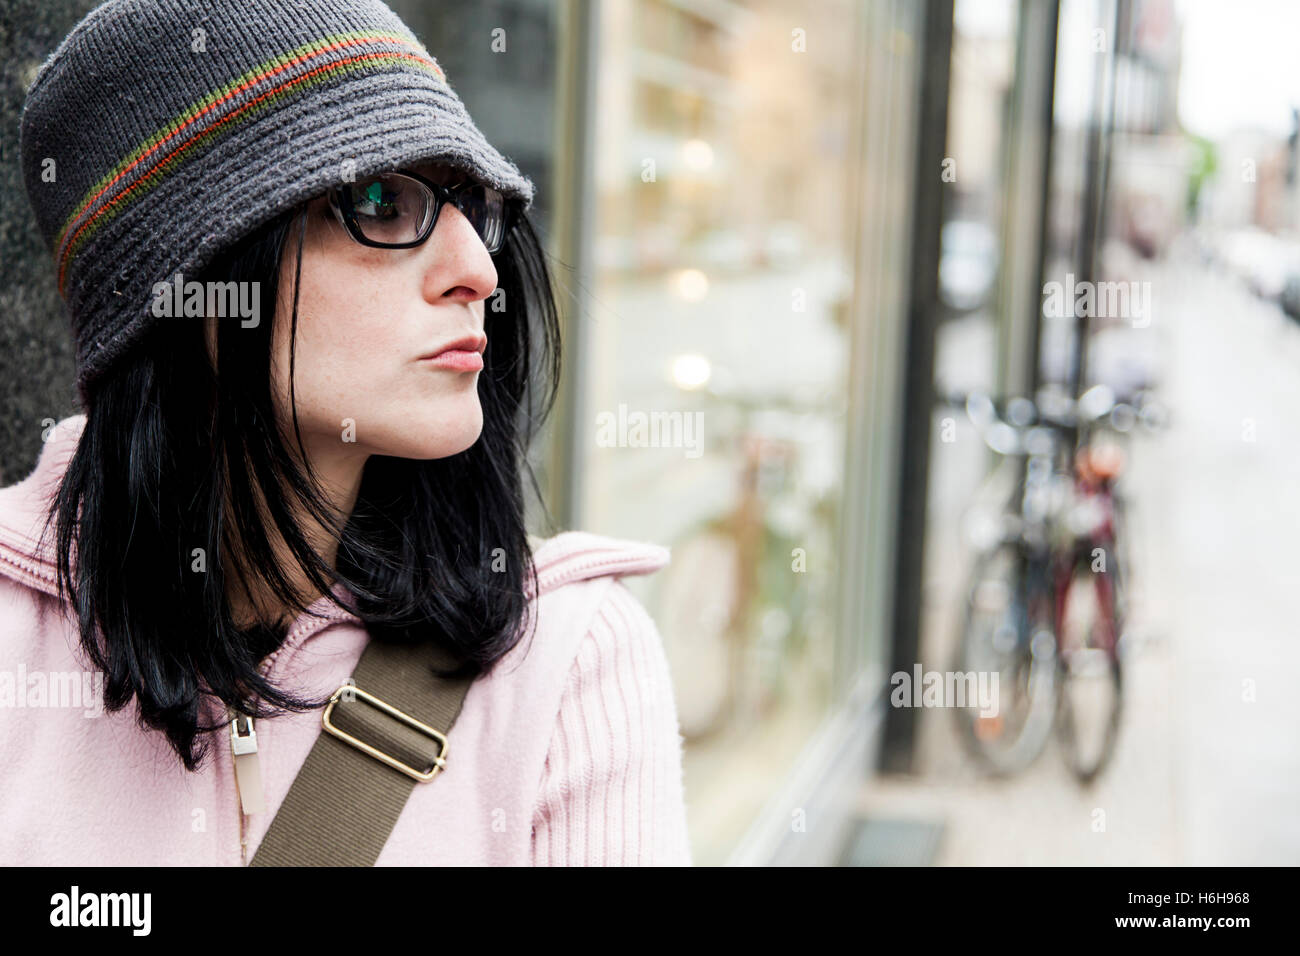 Urban portrait of a woman in her early thirties. Stock Photo